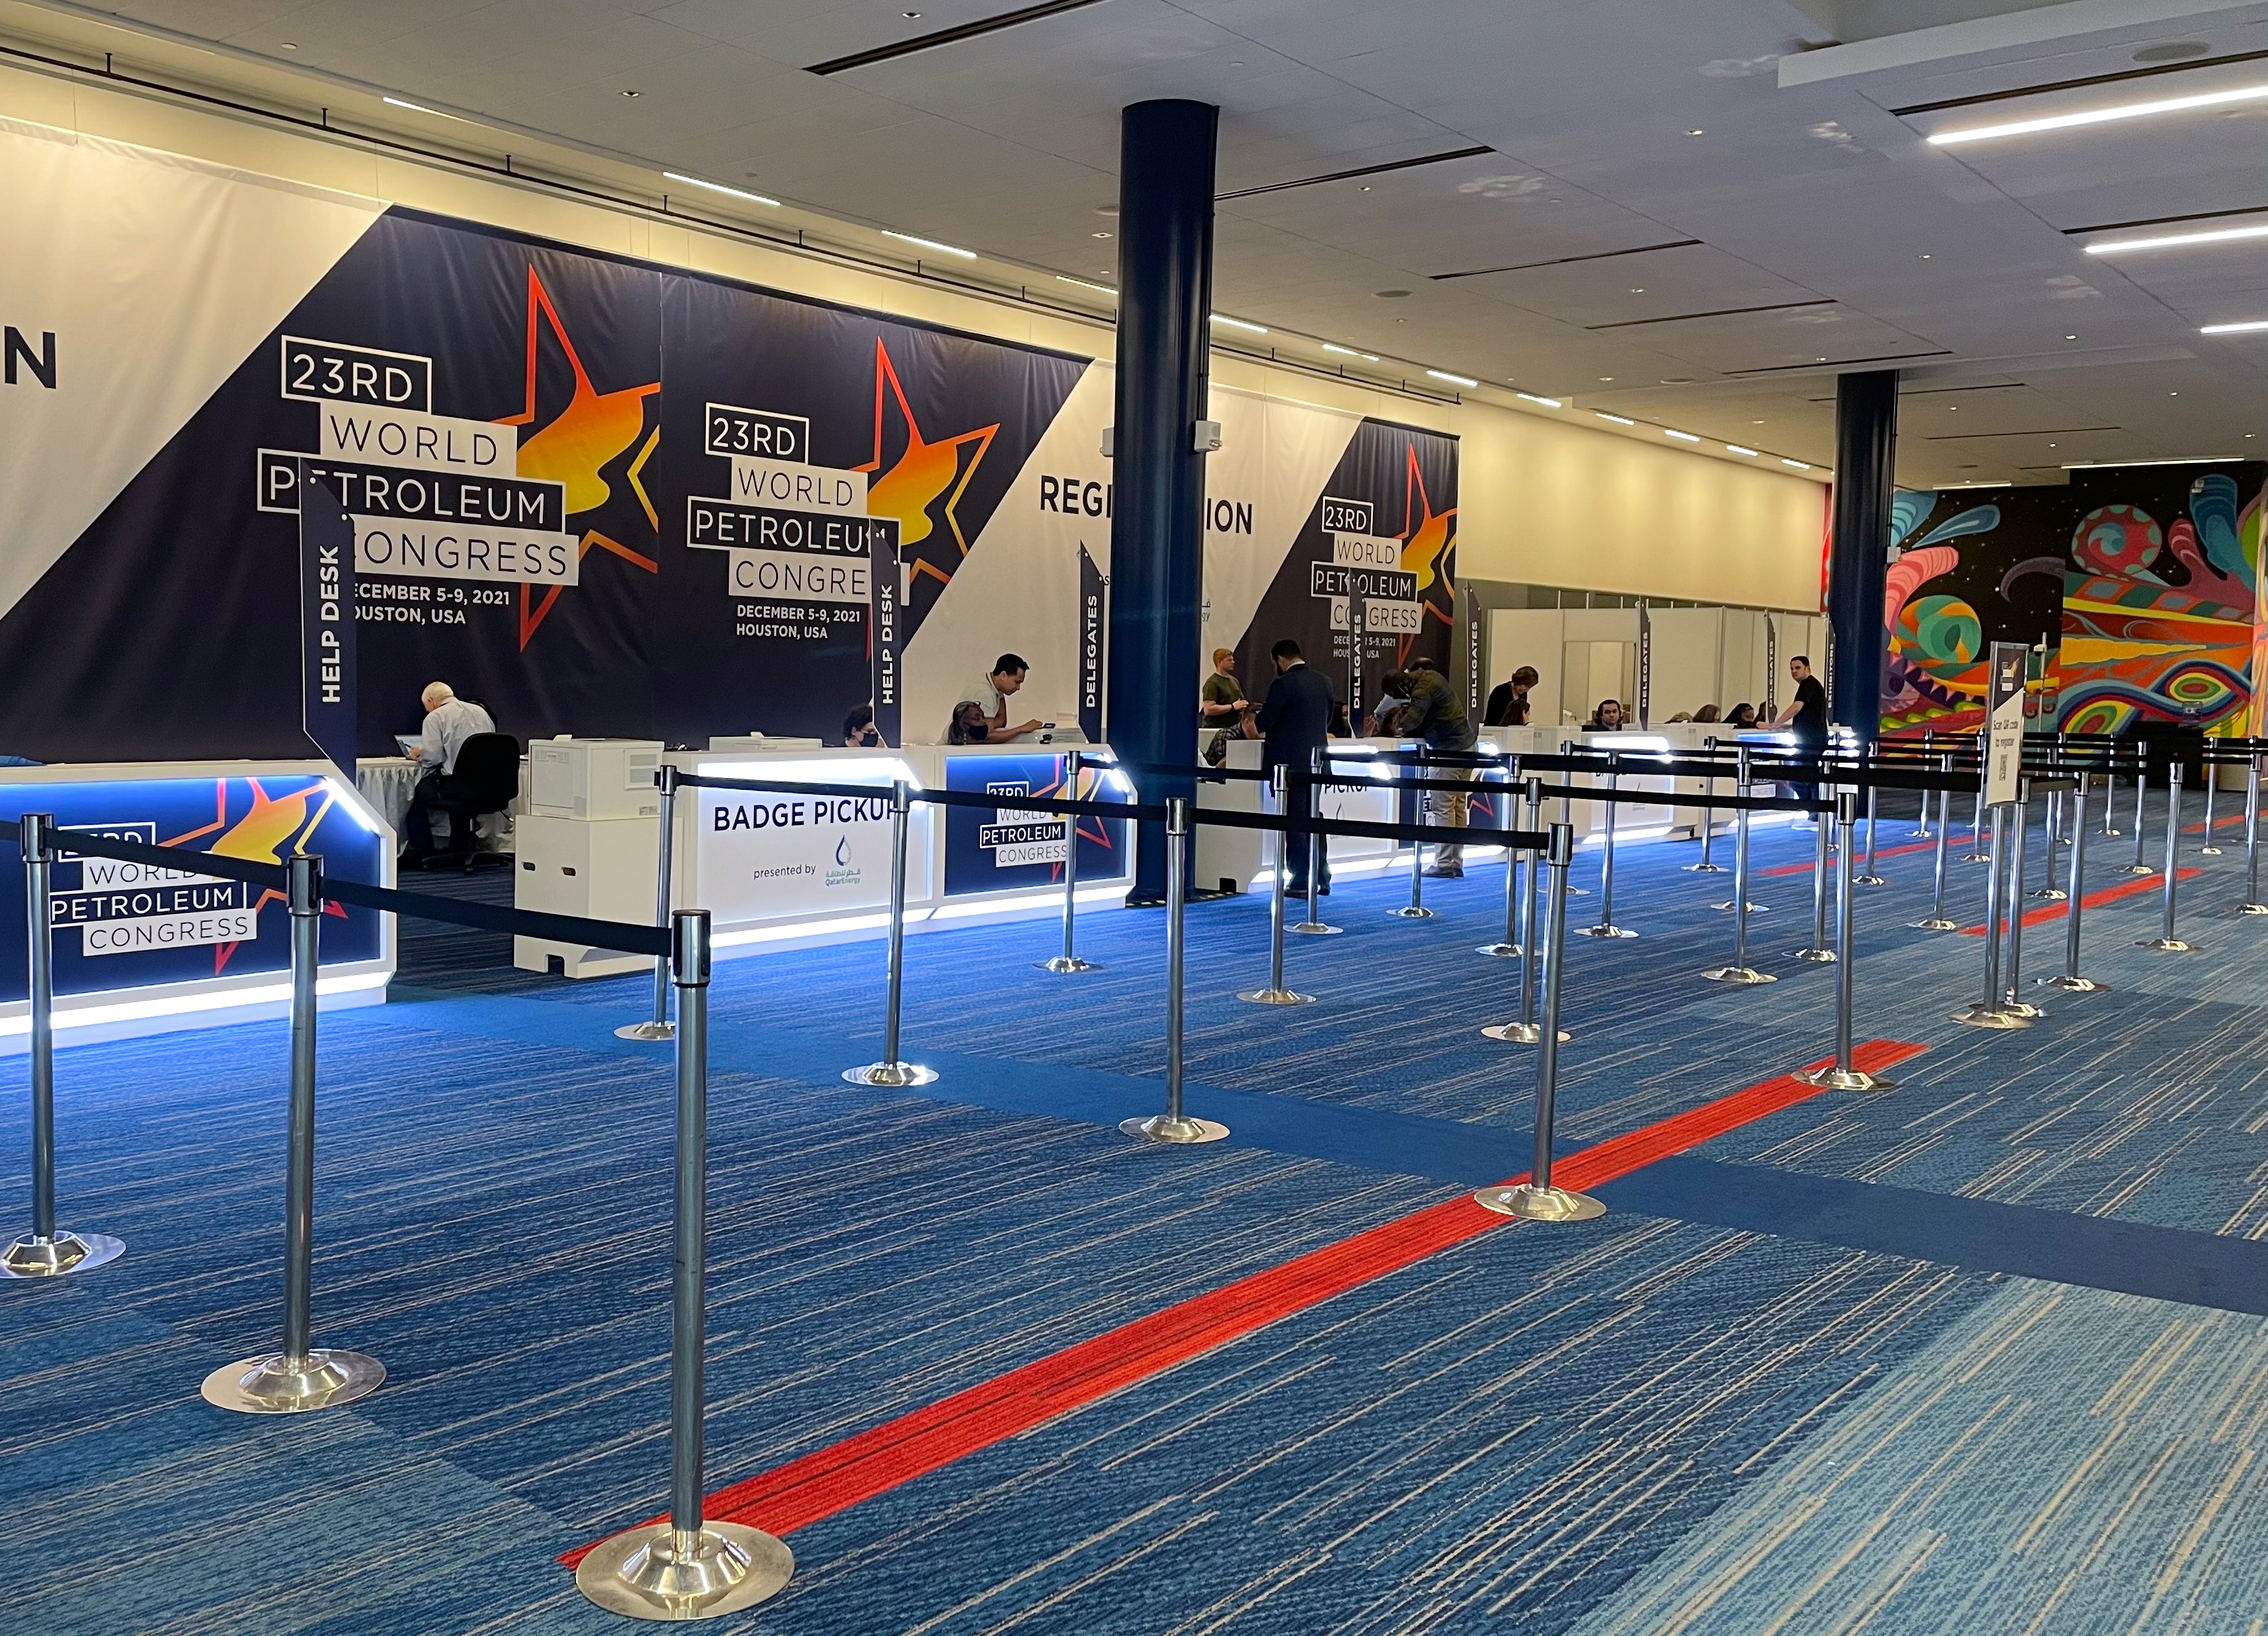 A view of a quiet registration desk for the World Petroleum Congress in Houston, Texas, U.S. on December 5, 2021 as organizers grappled with the fallout of new virus travel restrictions